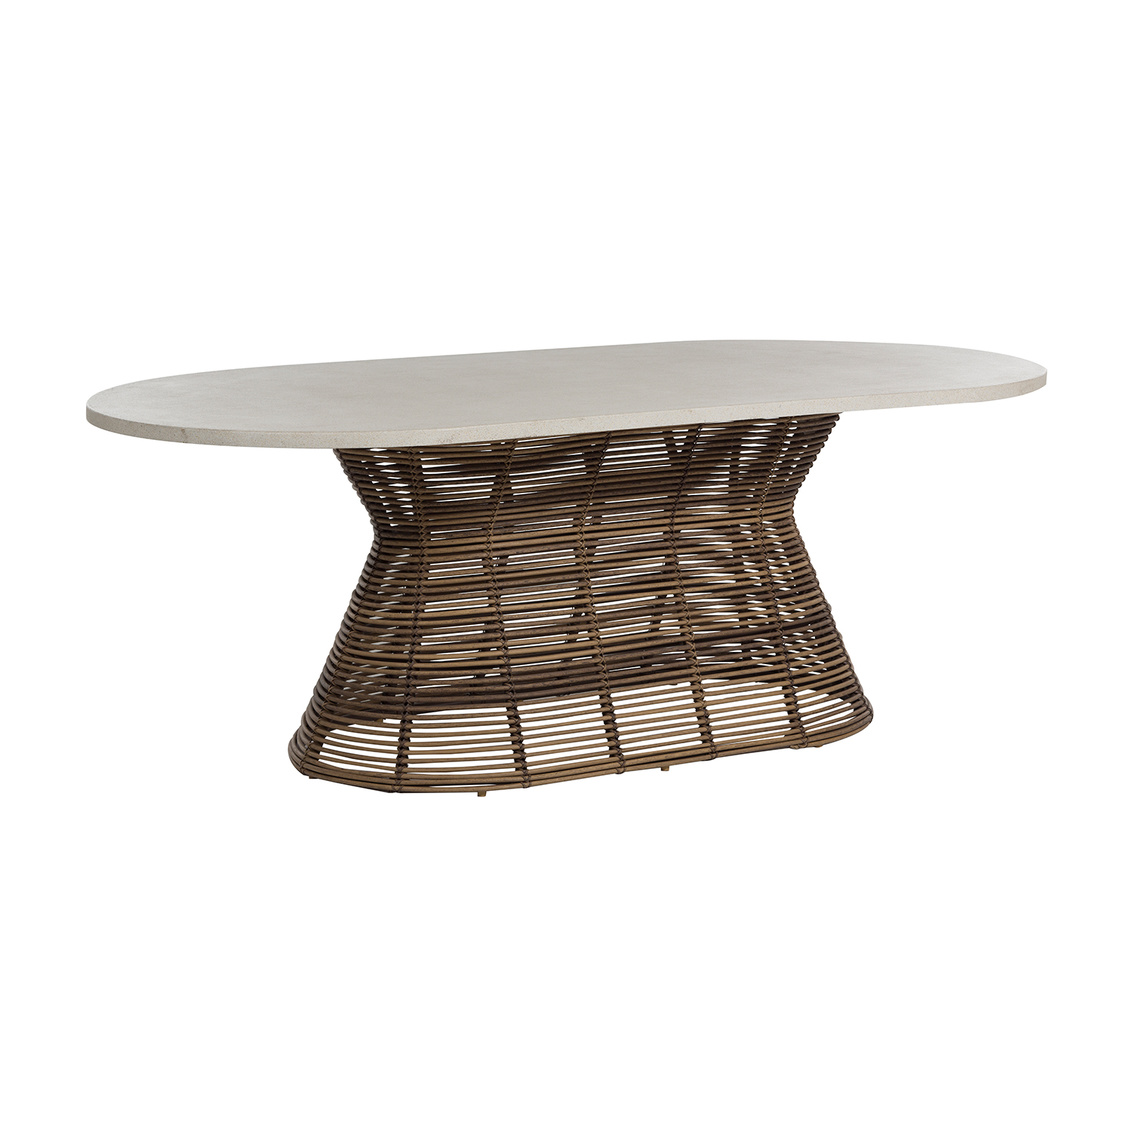 harris oval dining table in travertine superstone top (w/ umbrella hole) and raffia woven base product image